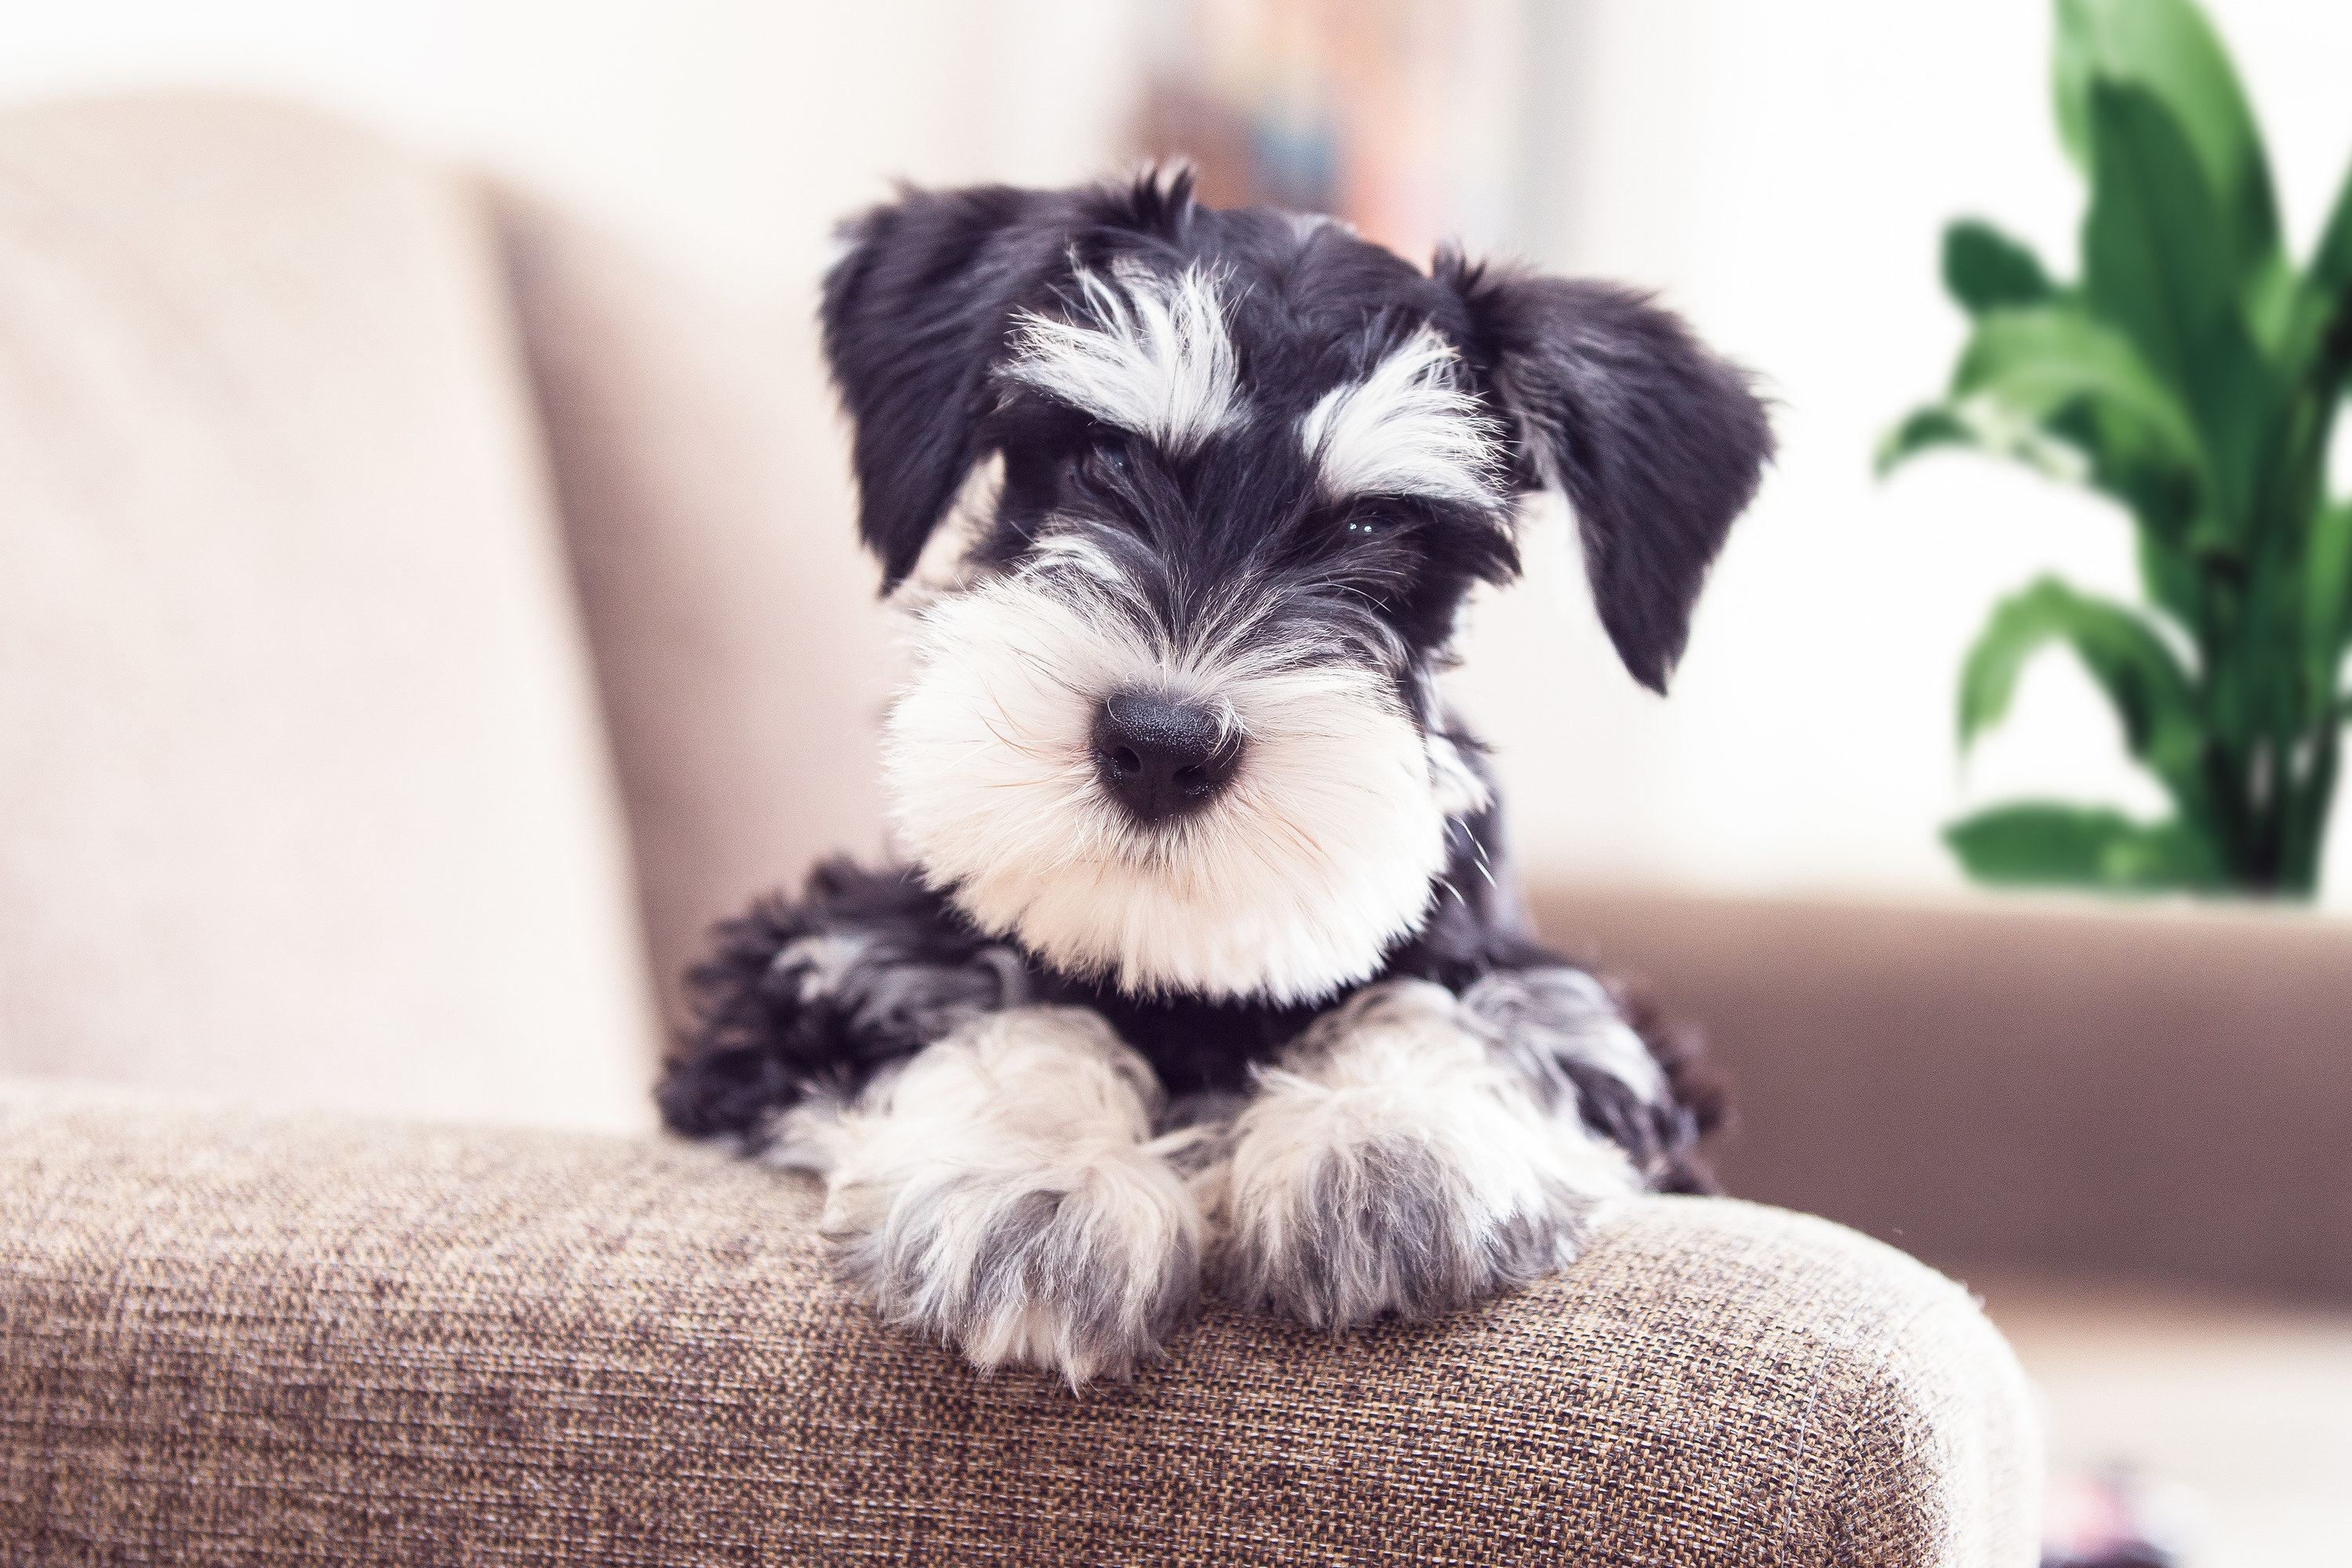 A Miniature Schnauzer posing on a couch for a picture